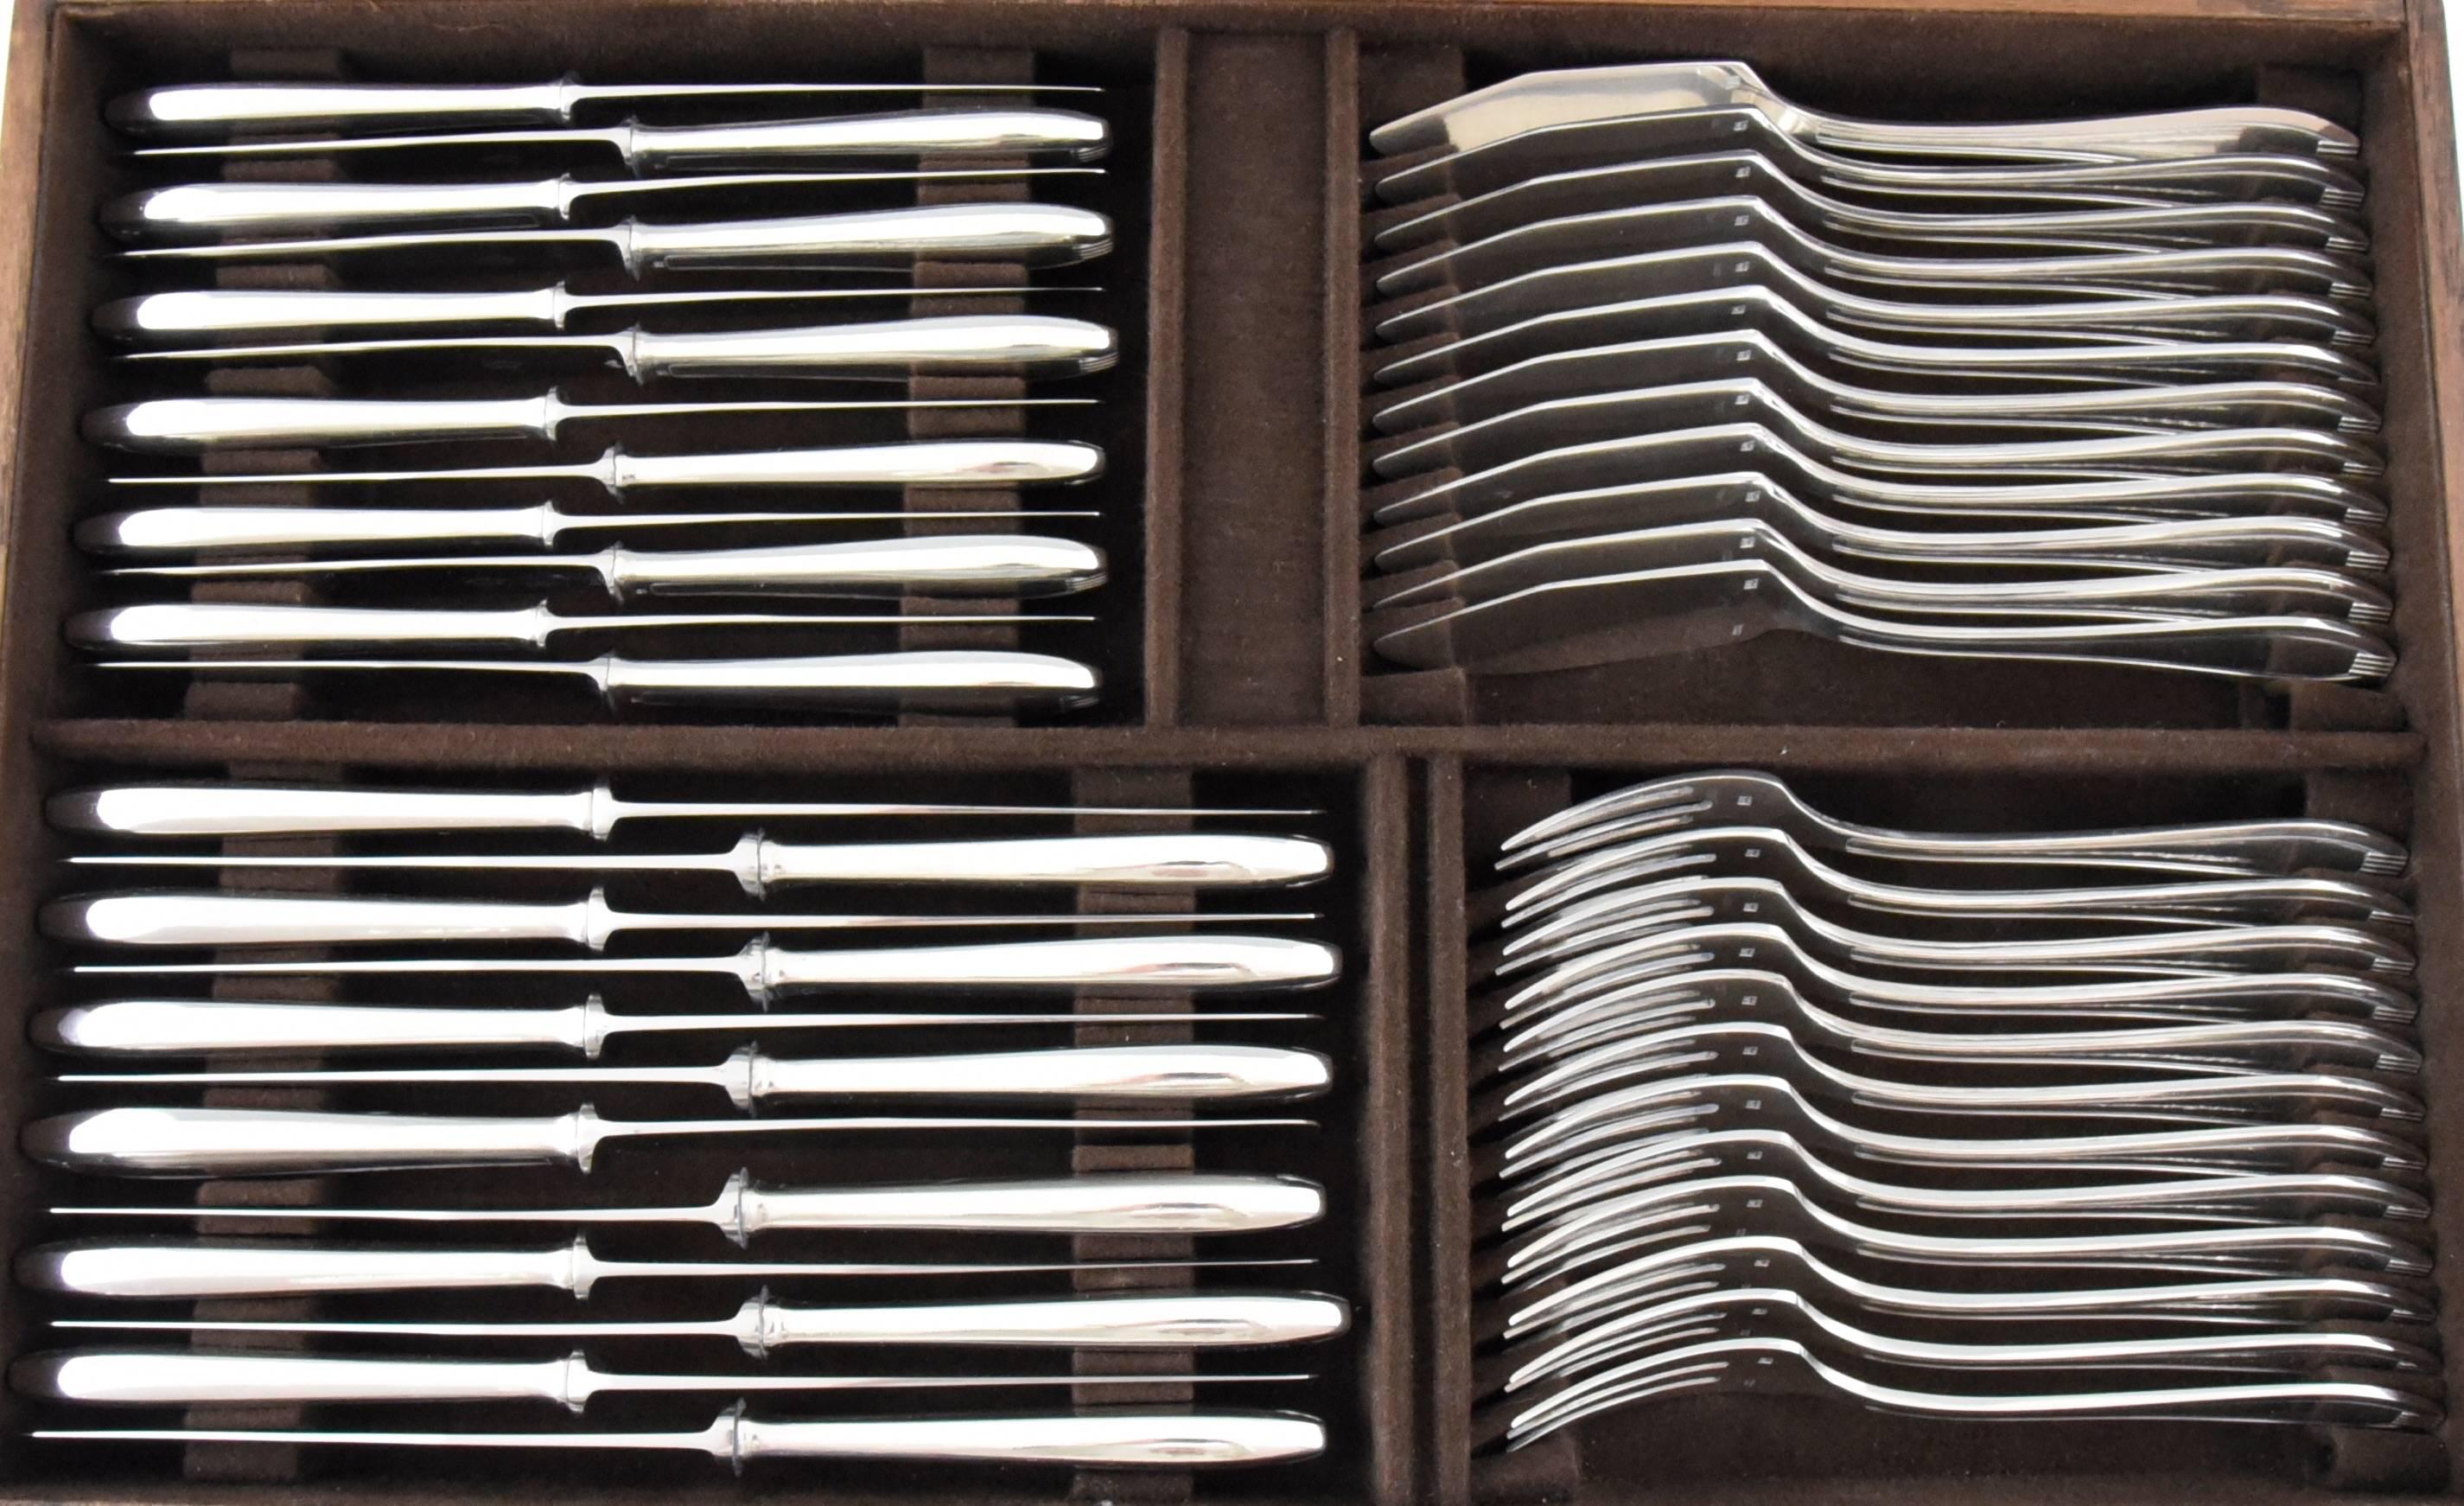 Silvered Art Deco Silver Plated 178 pc cutlery set by Frionnet in Original Case, 1930